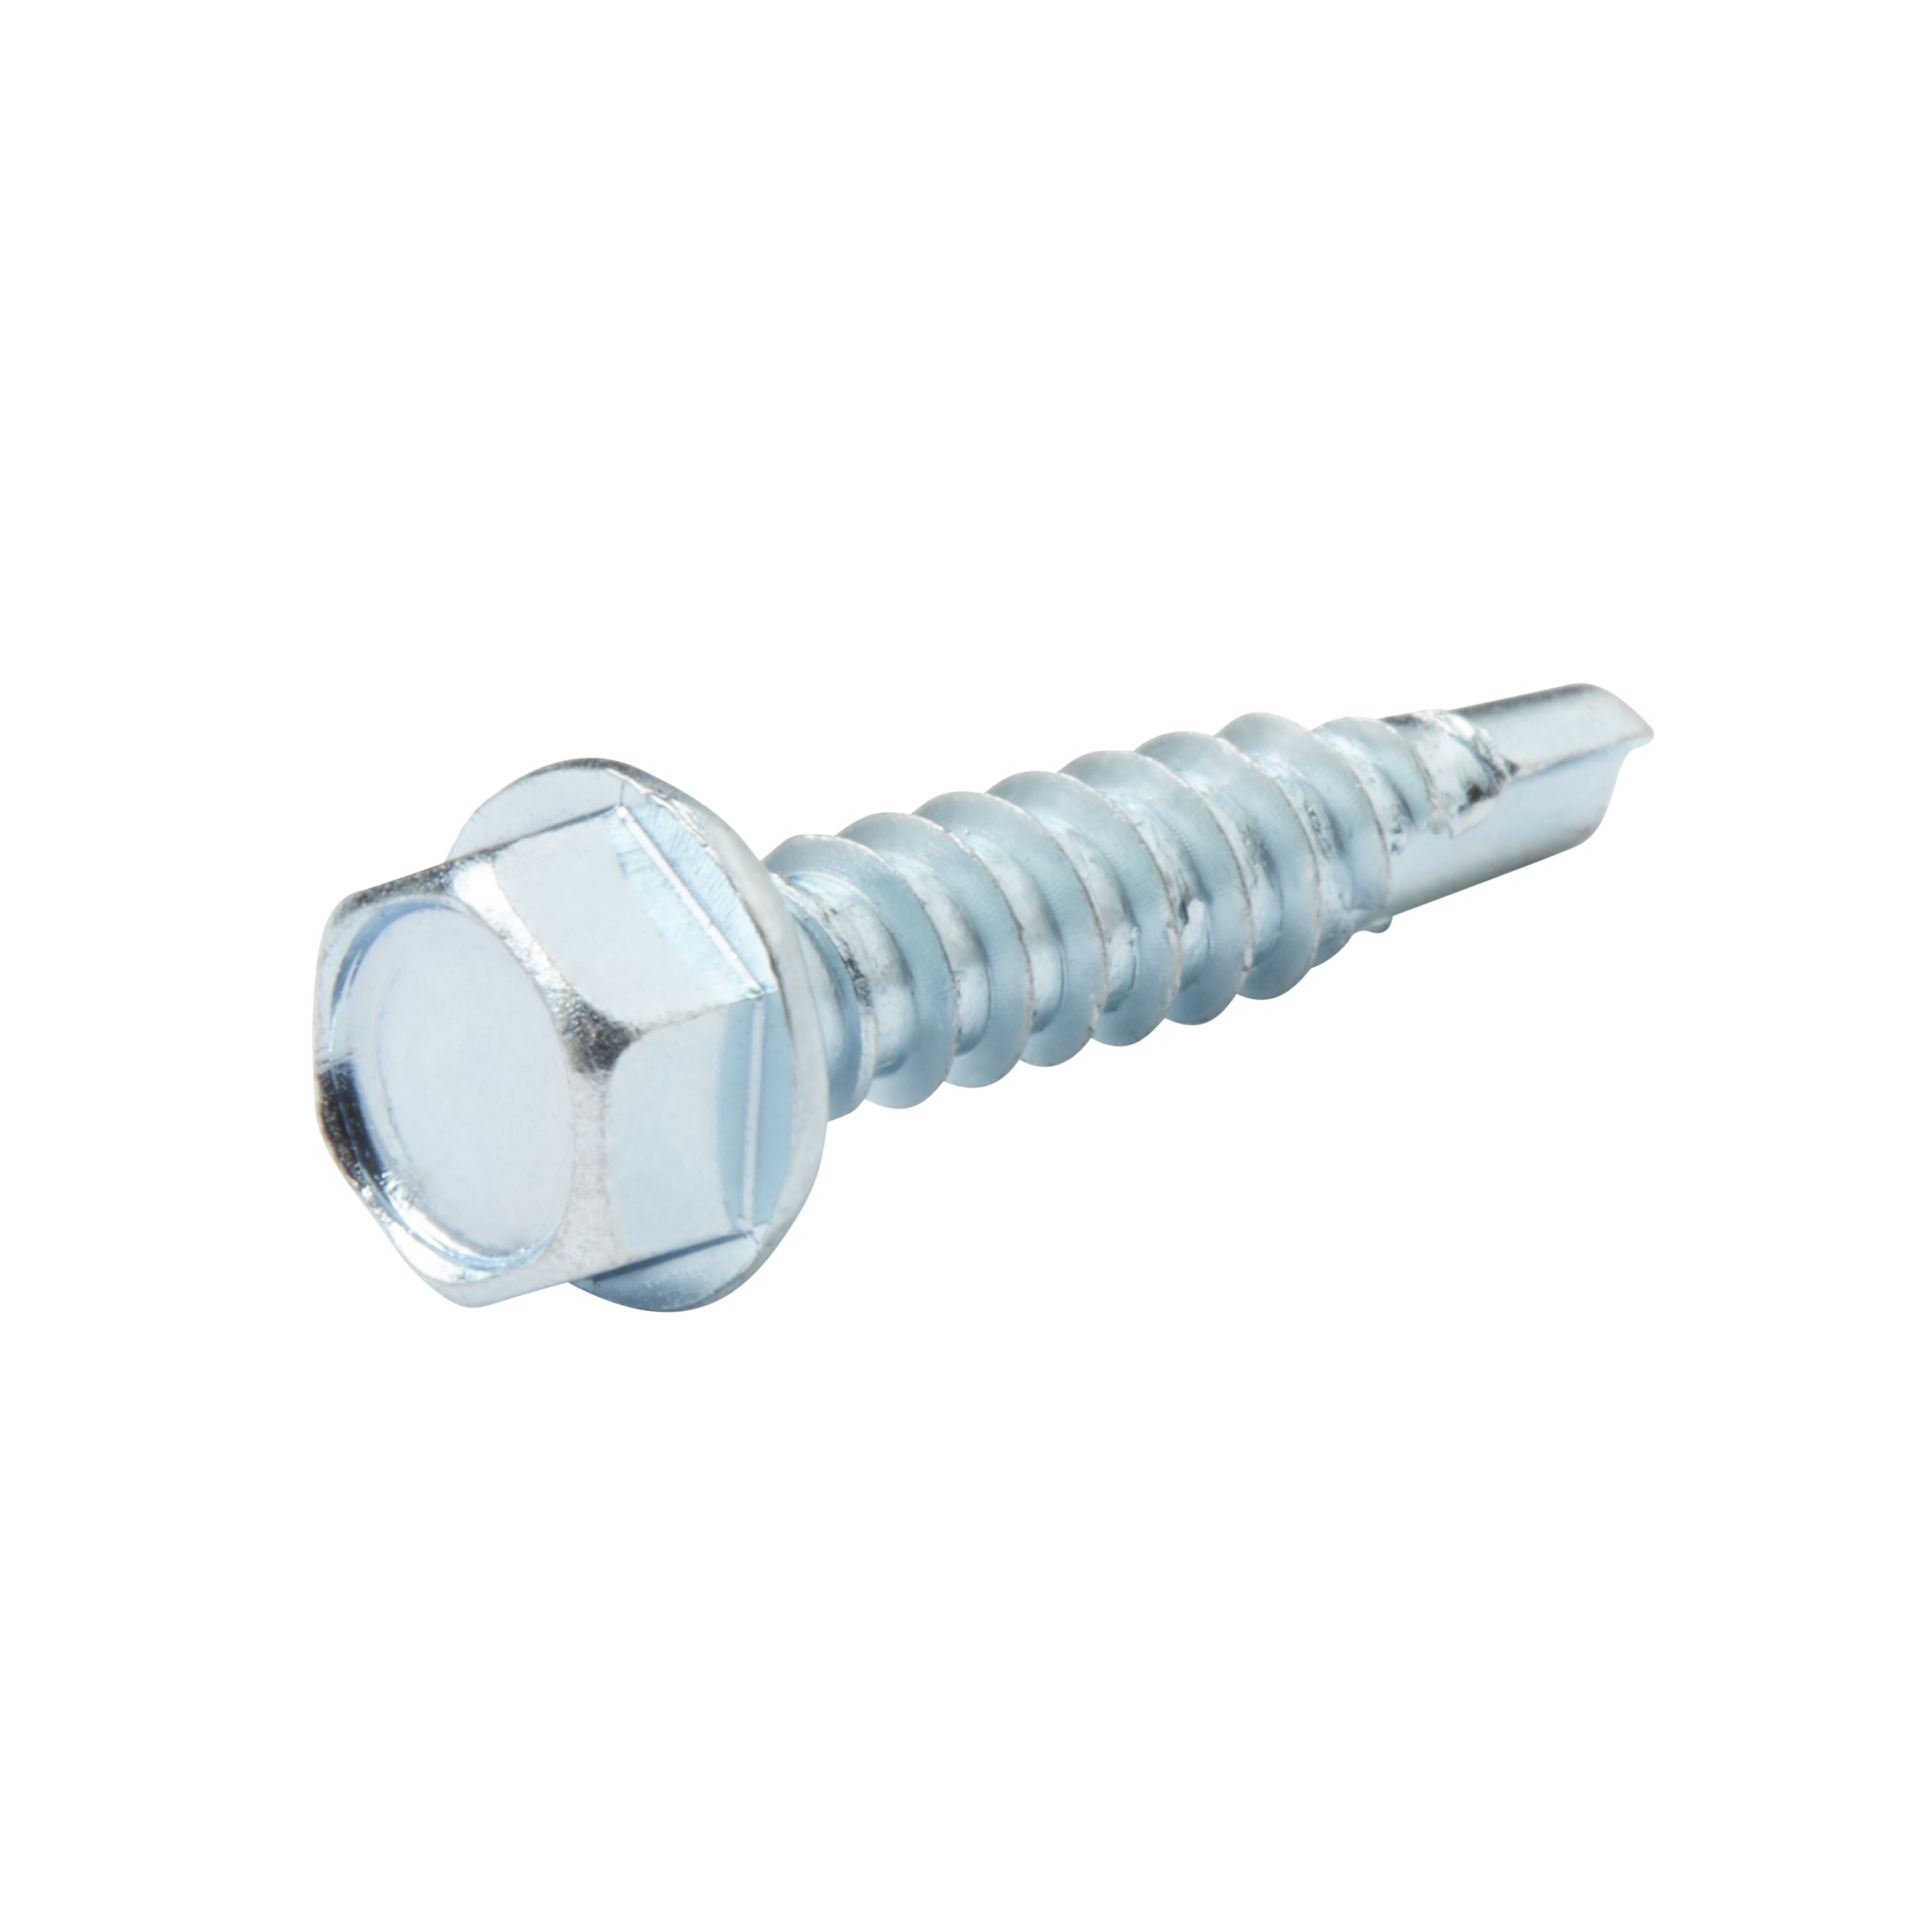 Diall Hex Zinc-plated Carbon steel Screw (Dia)5.5mm (L)25mm, Pack of 25